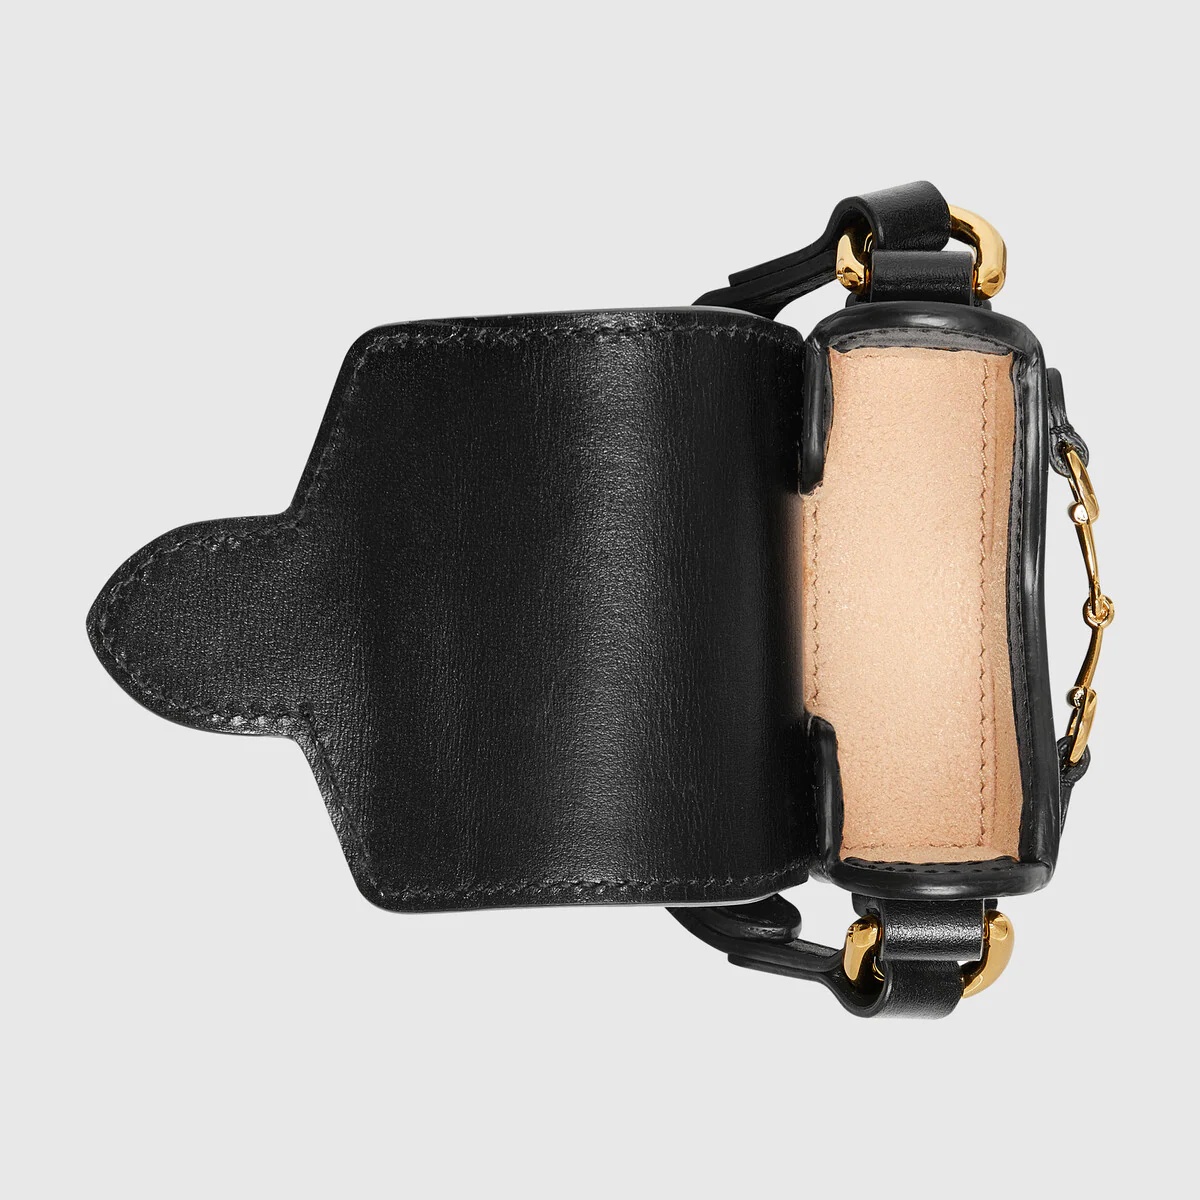 Gucci Horsebit 1955 case for AirPods - 2